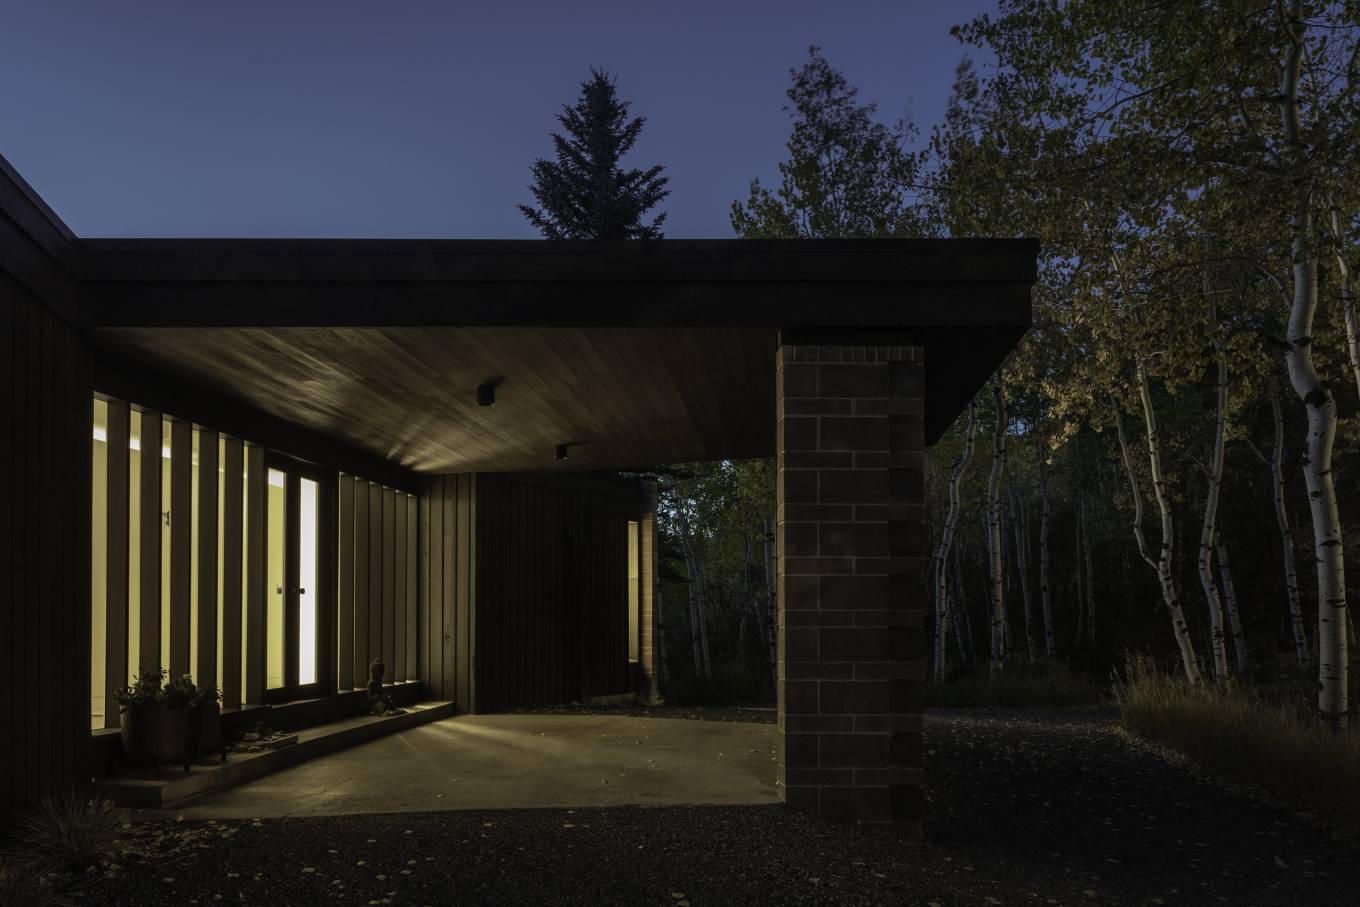 Originally constructed in 1968, this modest mid-century house was completely renovated and thrives in its surrounding aspen forest on a sloping hillside while enjoying the seasonal changes within its high-alpine landscape.